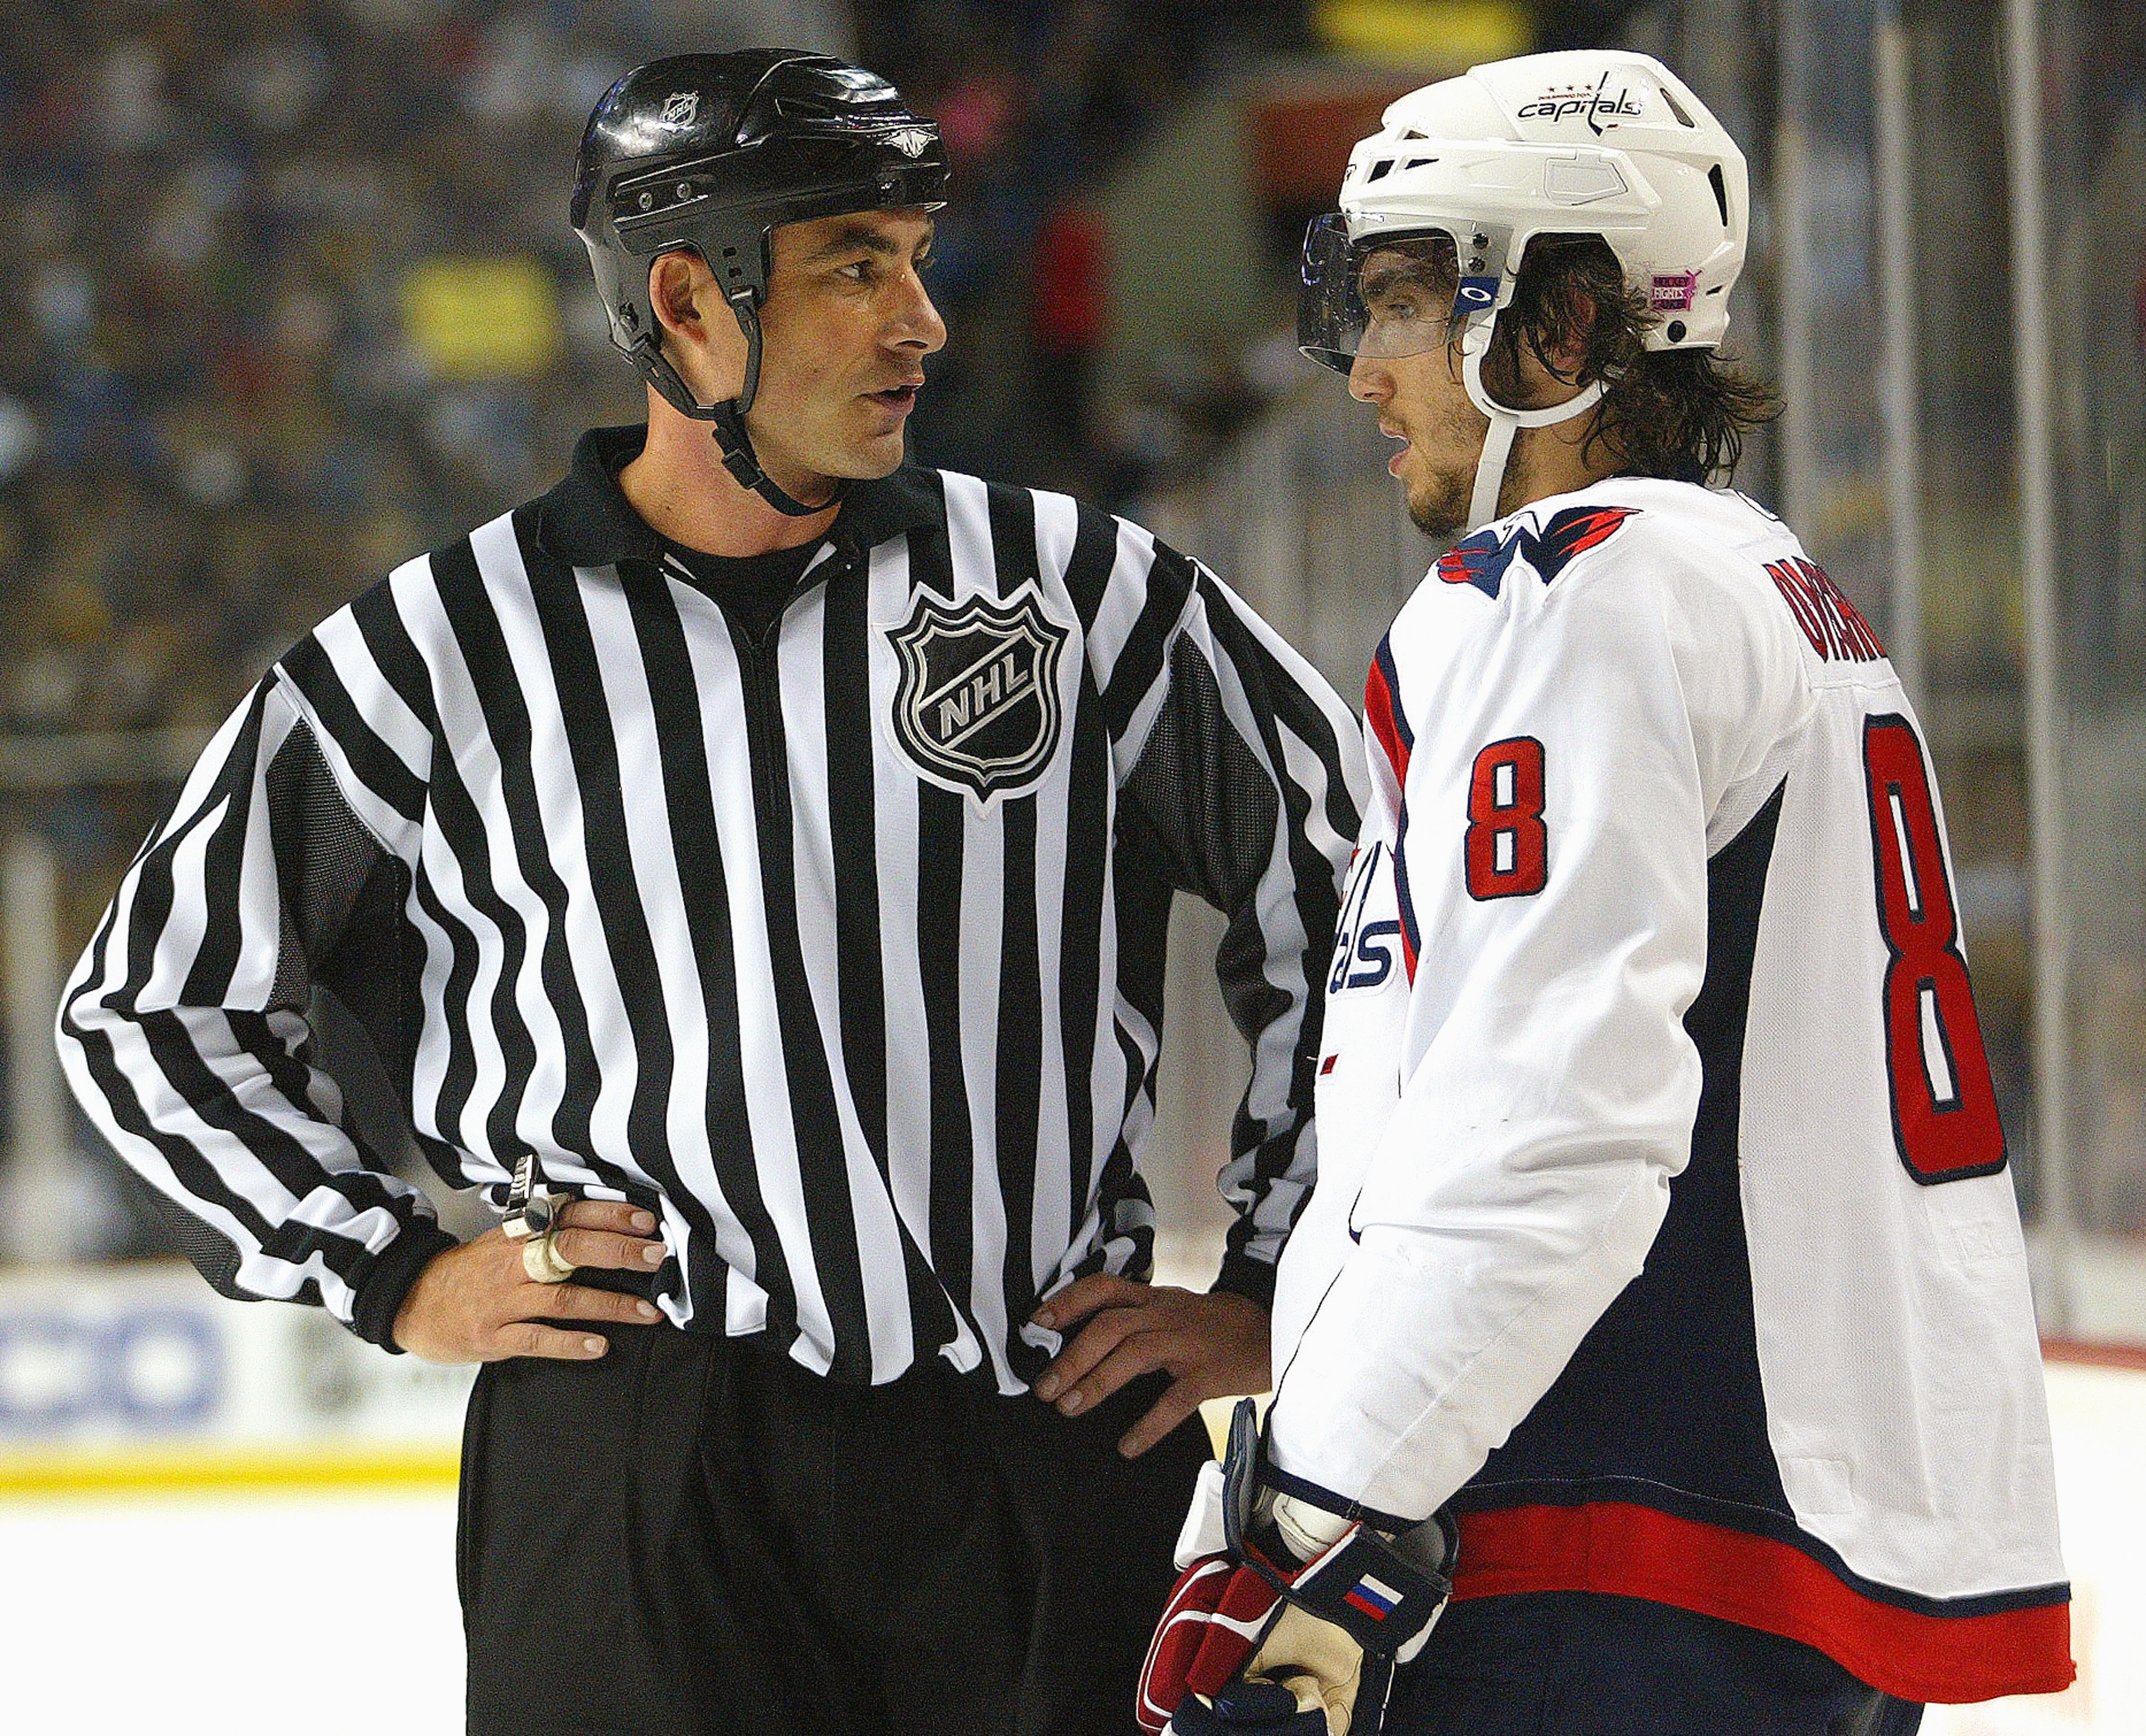 BUFFALO-OCTOBER 13:  Linesman Steve Barton chats with Alex Ovechkin #8 of the Washington Capitals during a stoppage in play in a game against the Buffalo Sabres on October 13, 2007 at the HSBC Arena in Buffalo, NewYork. The Sabres defeated the Capitals 7-